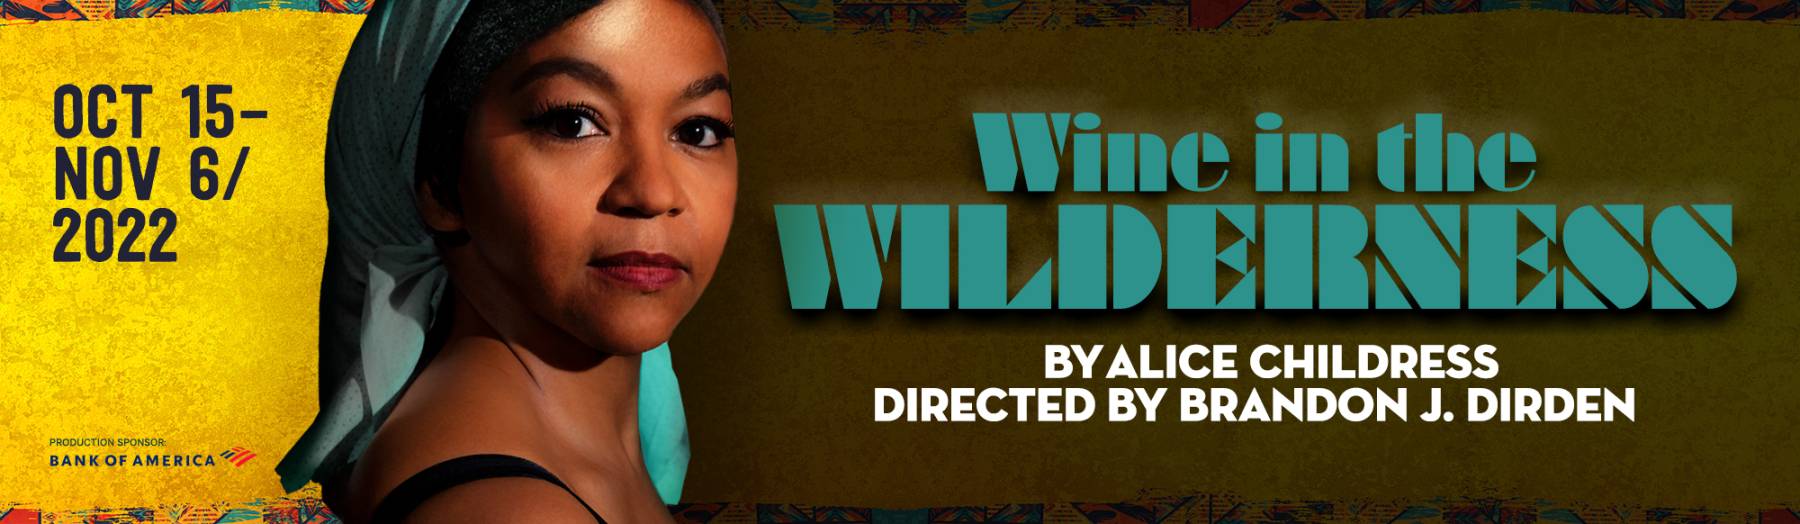 Wine in the Wilderness By Alice Childress Directed by Brandon J. Dirden